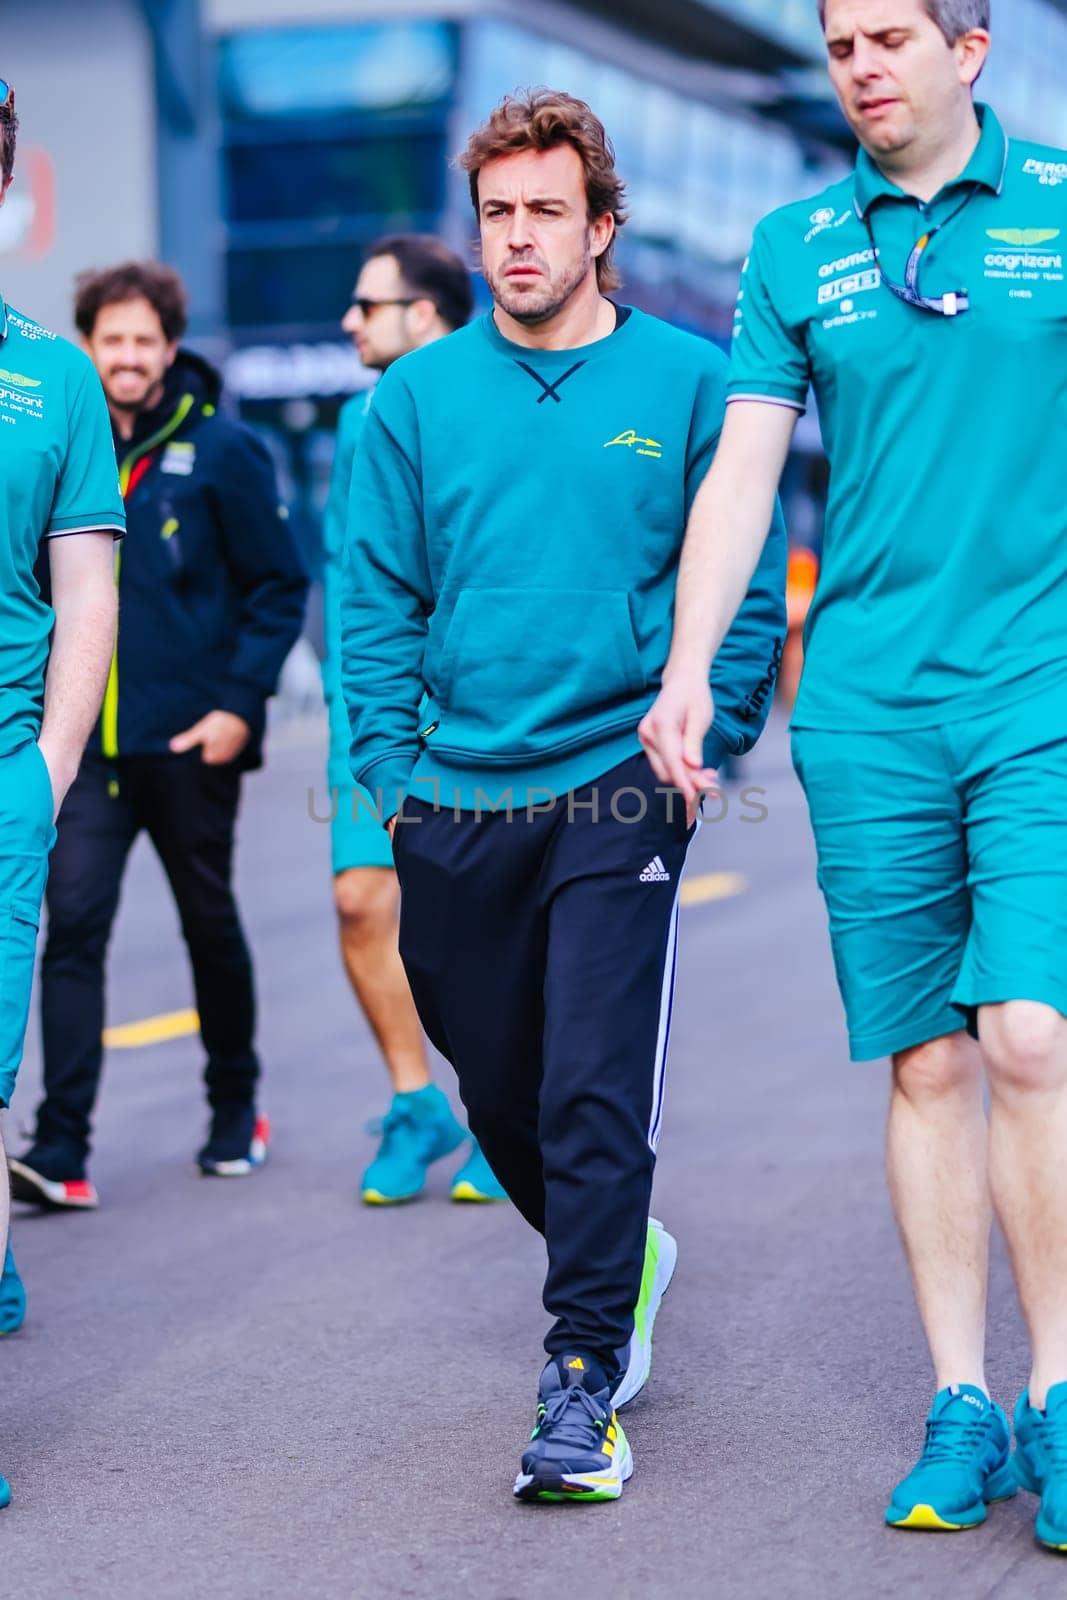 MELBOURNE, AUSTRALIA - MARCH 29: Fernando Alonso of Spain inspecting the circuit before the 2023 Australian Formula 1 Grand Prix on 29th March 2023